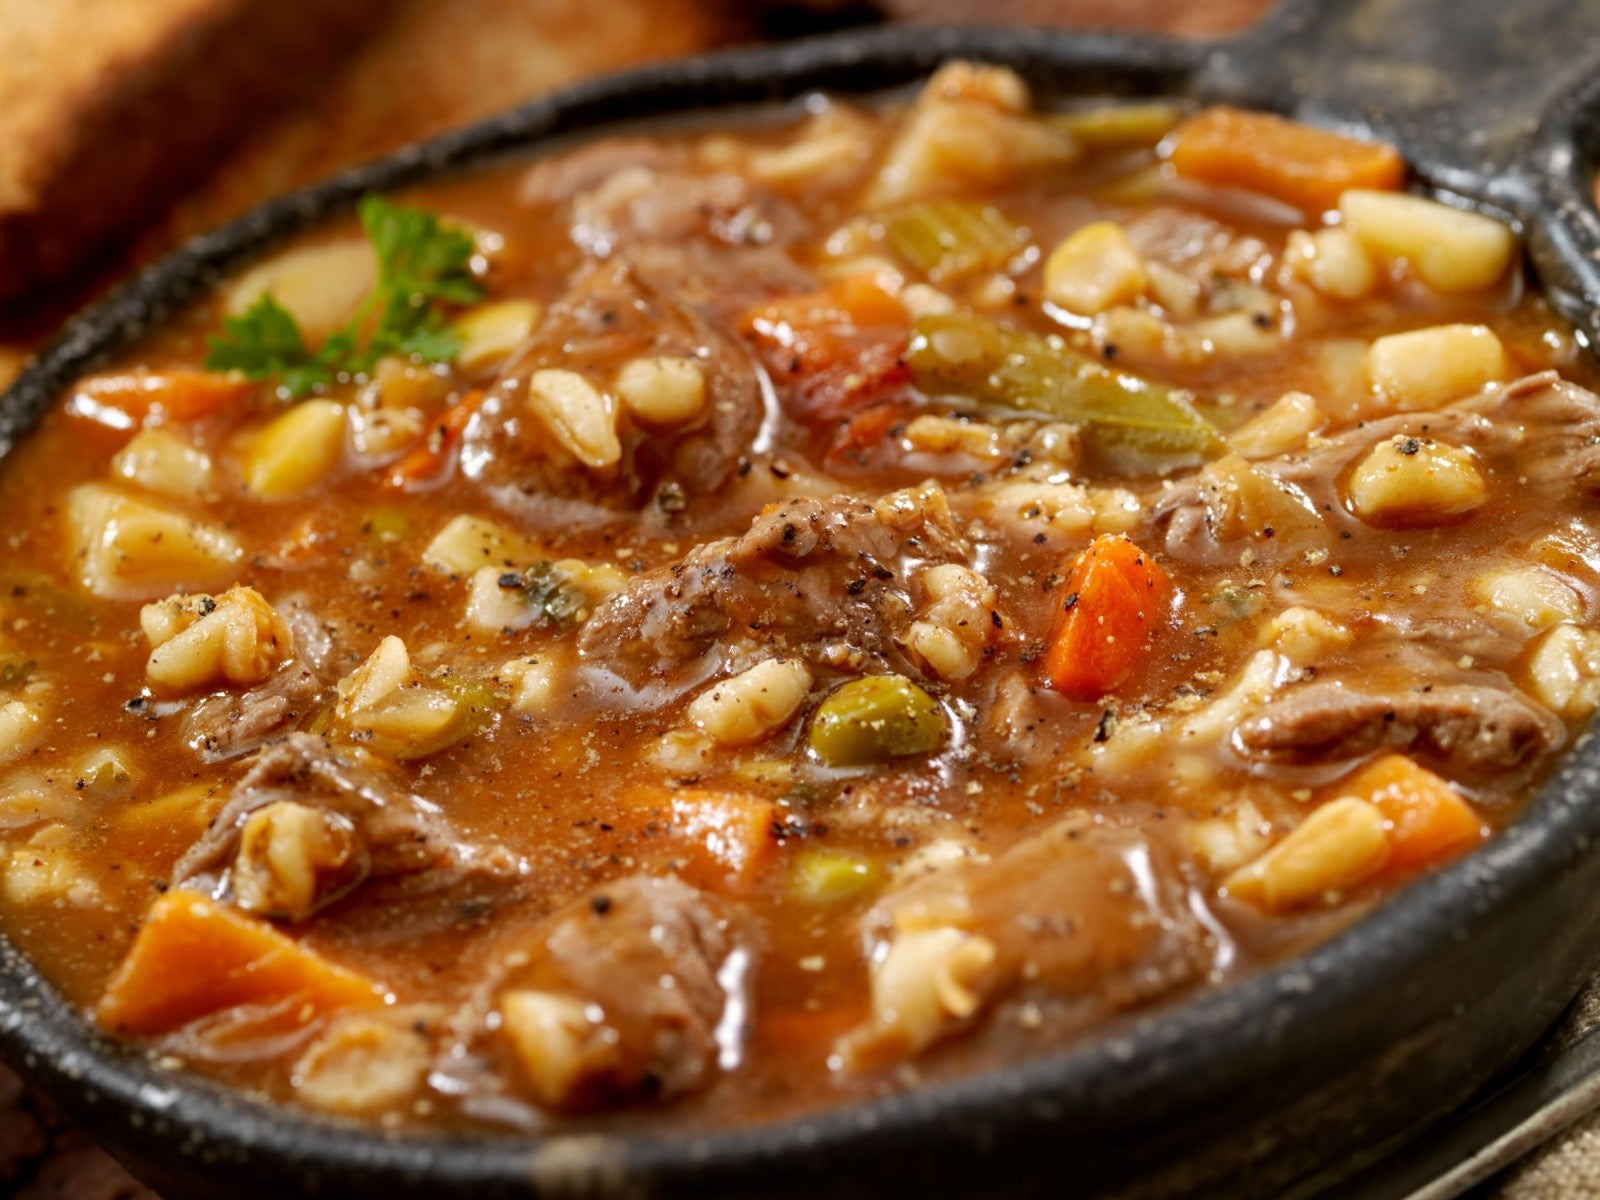 Wholesome And Delicious Bison & Barley Soup Recipe - Beck & Bulow